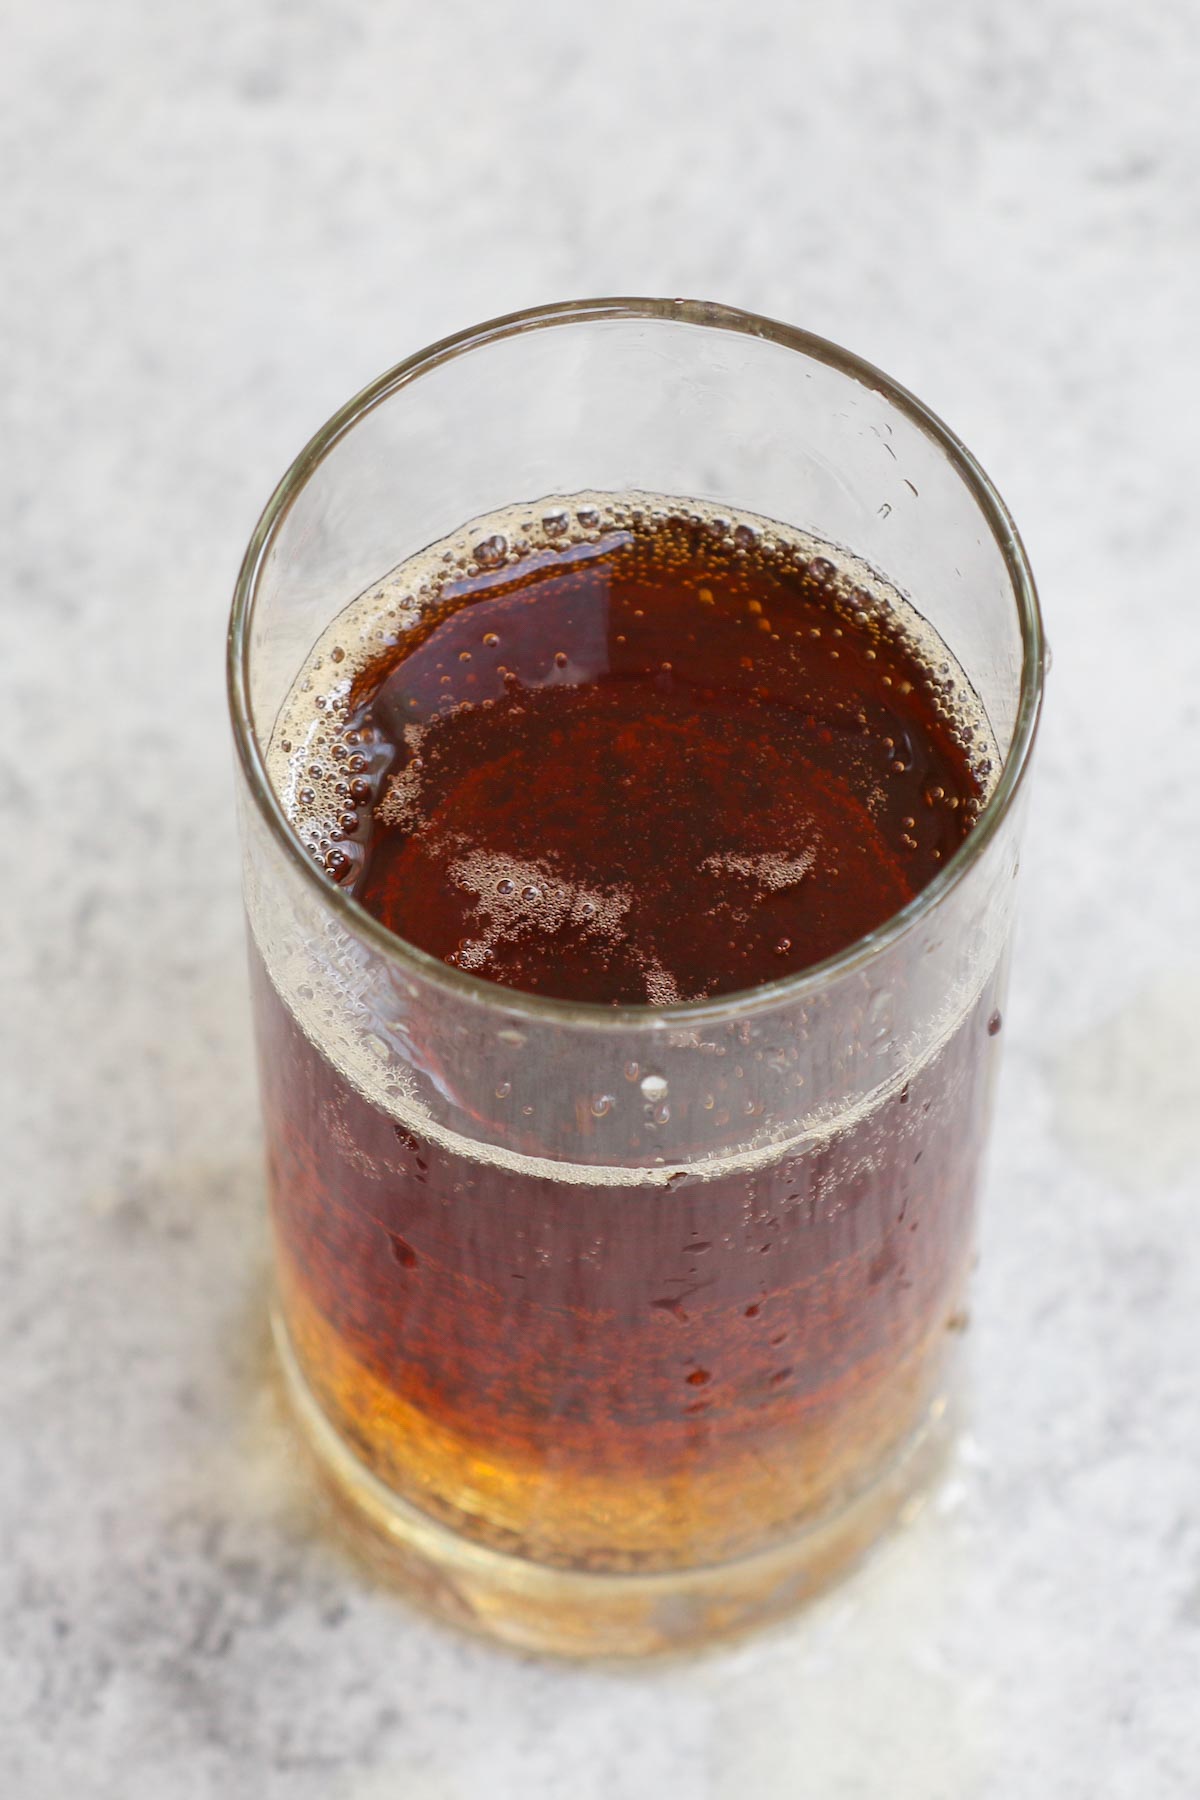 Jager Bomb or Jägerbomb is a simple cocktail that takes 3 minutes to make, but don’t underestimate its ability to get a party started! Every bartender knows this popular drink and it has only 2 ingredients – Jägermeister shot and Red Bull energy drink. 